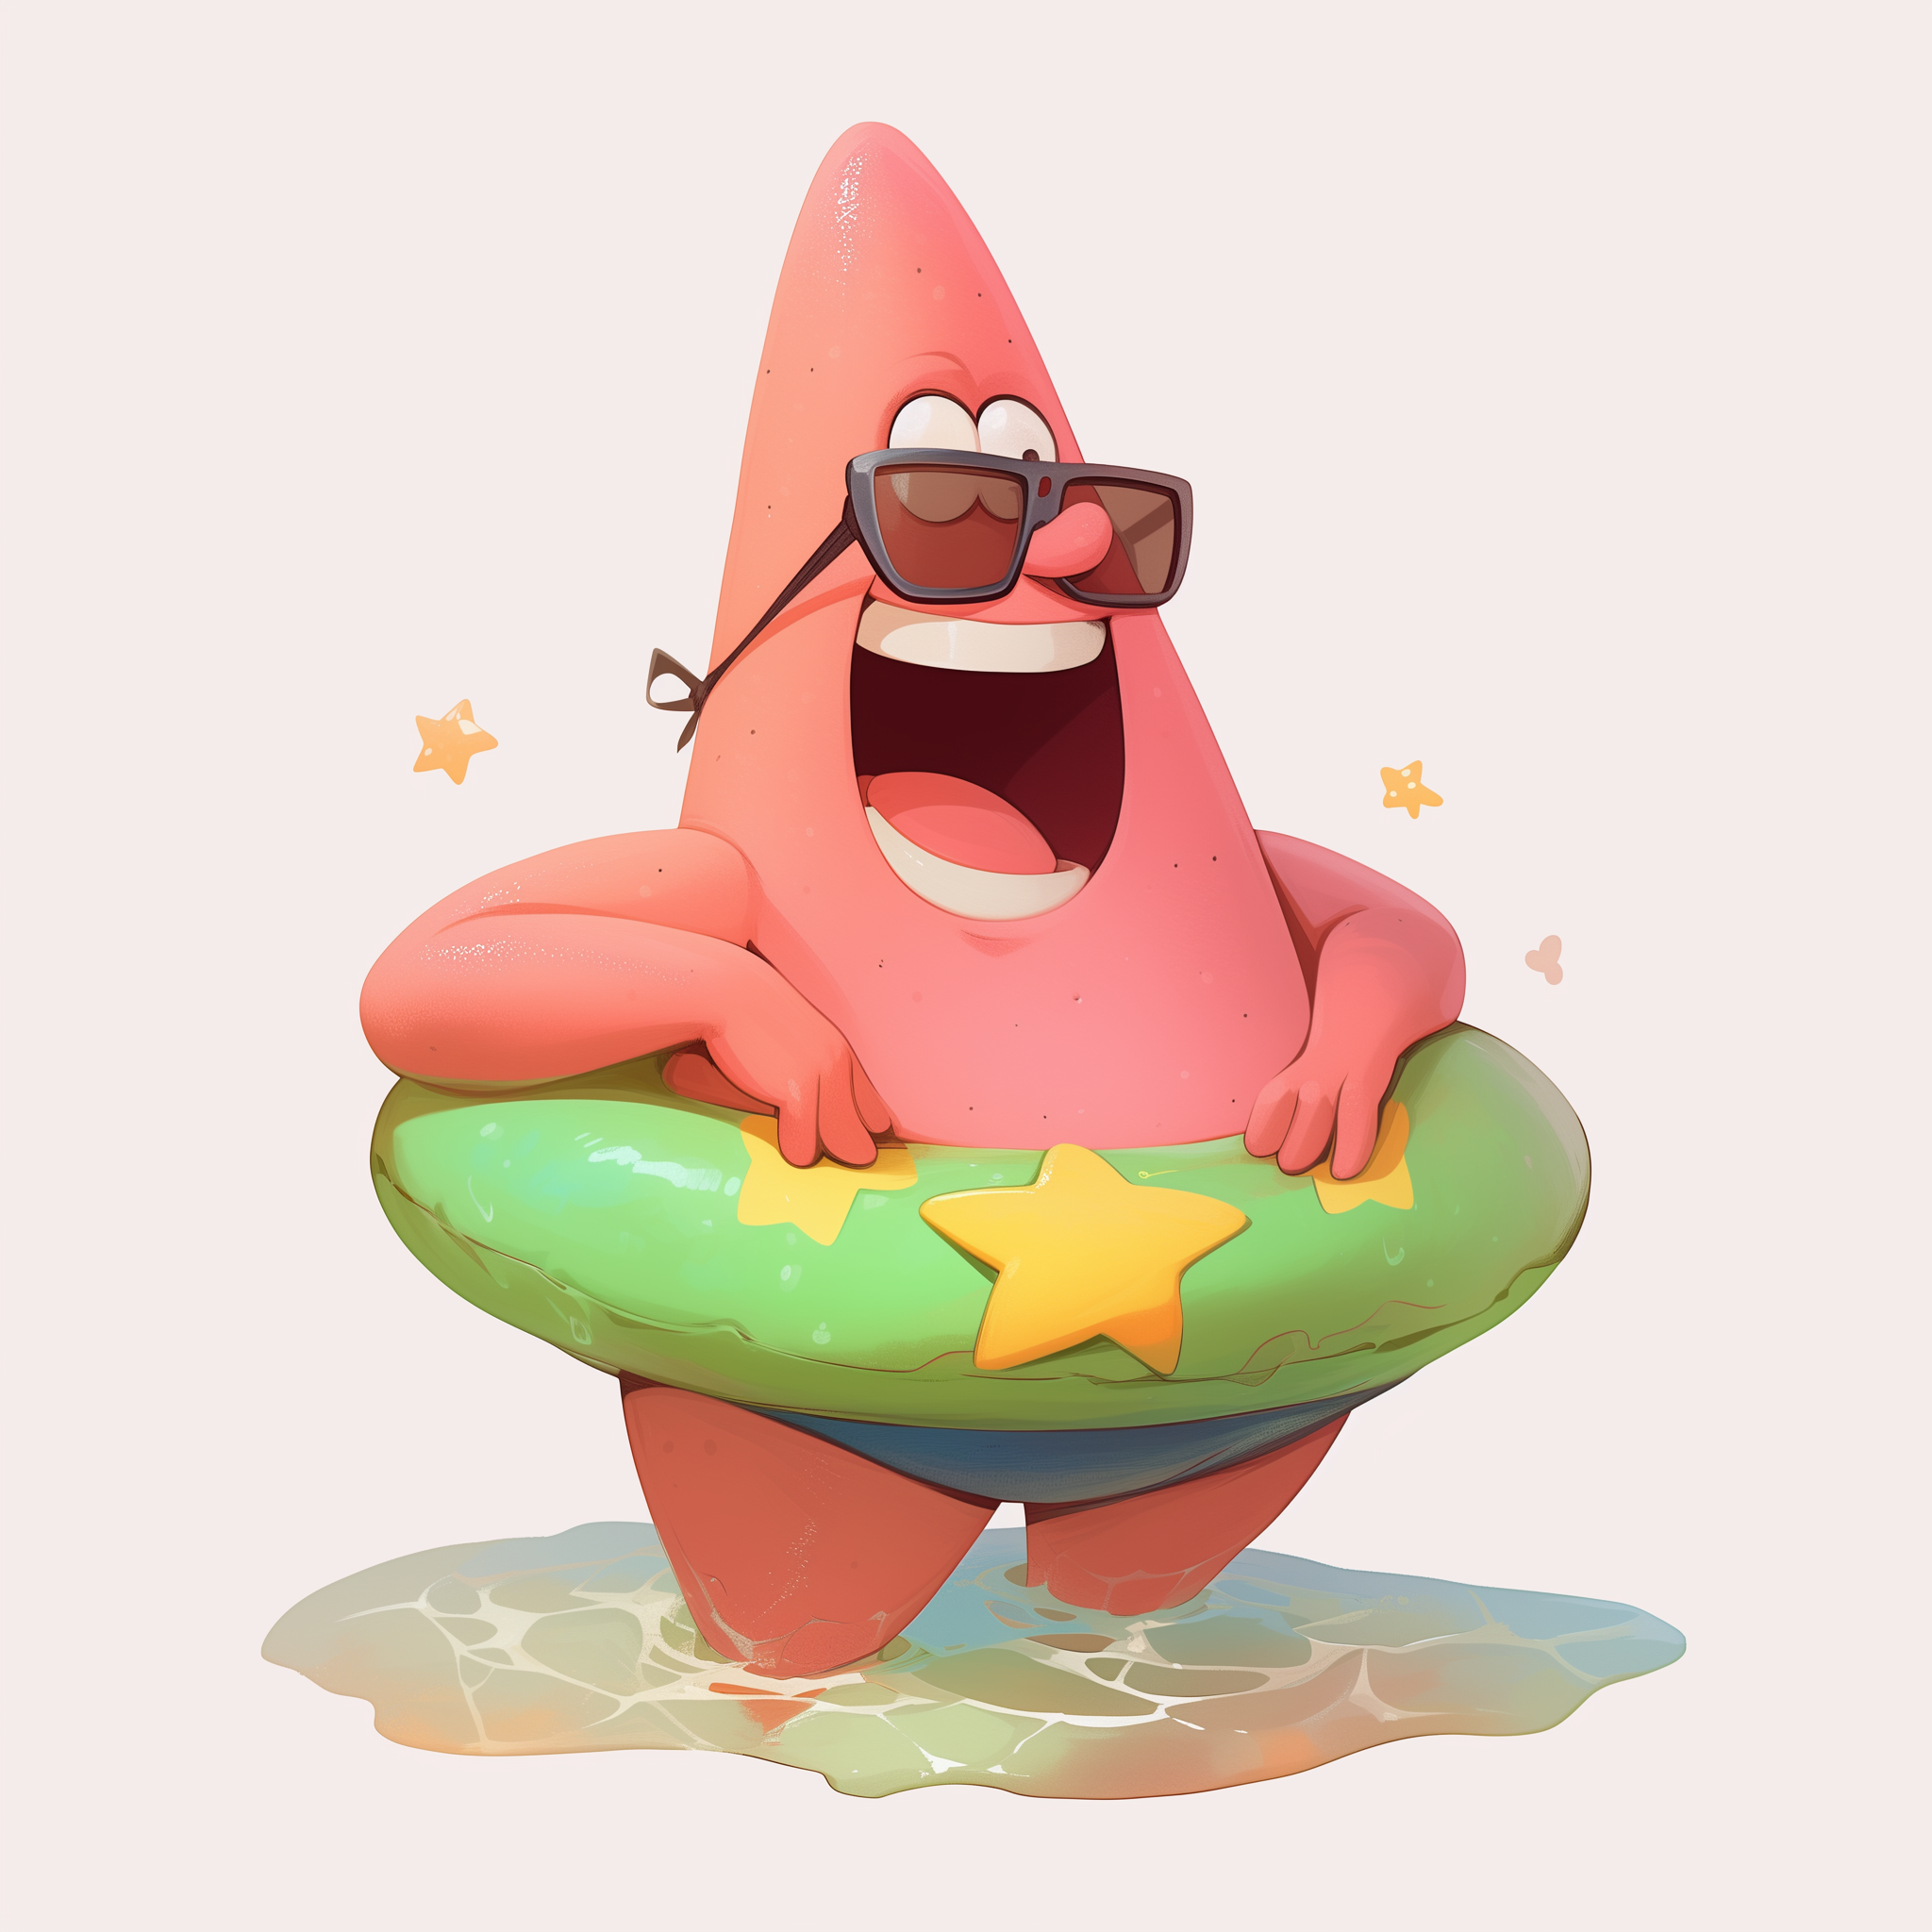 Cartoon avatar of Patrick Star from SpongeBob SquarePants, wearing sunglasses and striking a pose on a pool float, perfect for a fun profile picture.